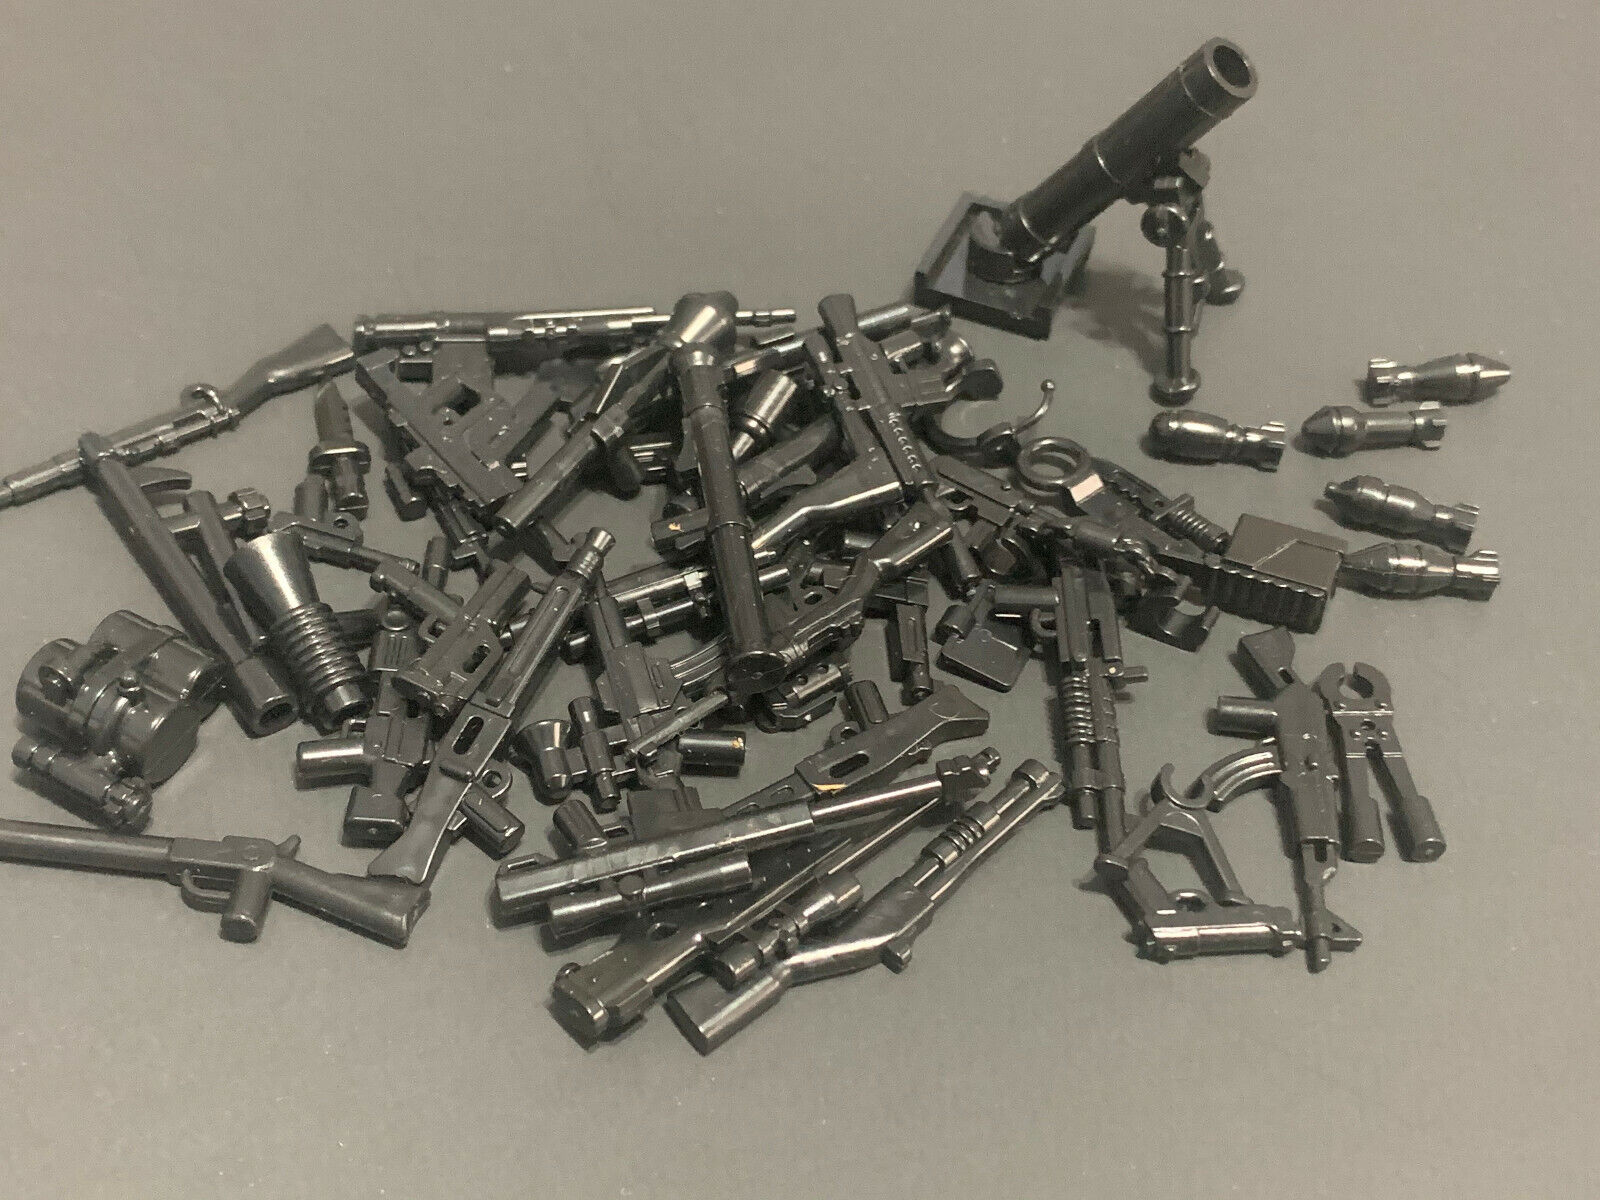 50 PCS WEAPON PACK - Assorted Random Weapons of Guns, Rifles for Lego Minifigure Compatible for Lego